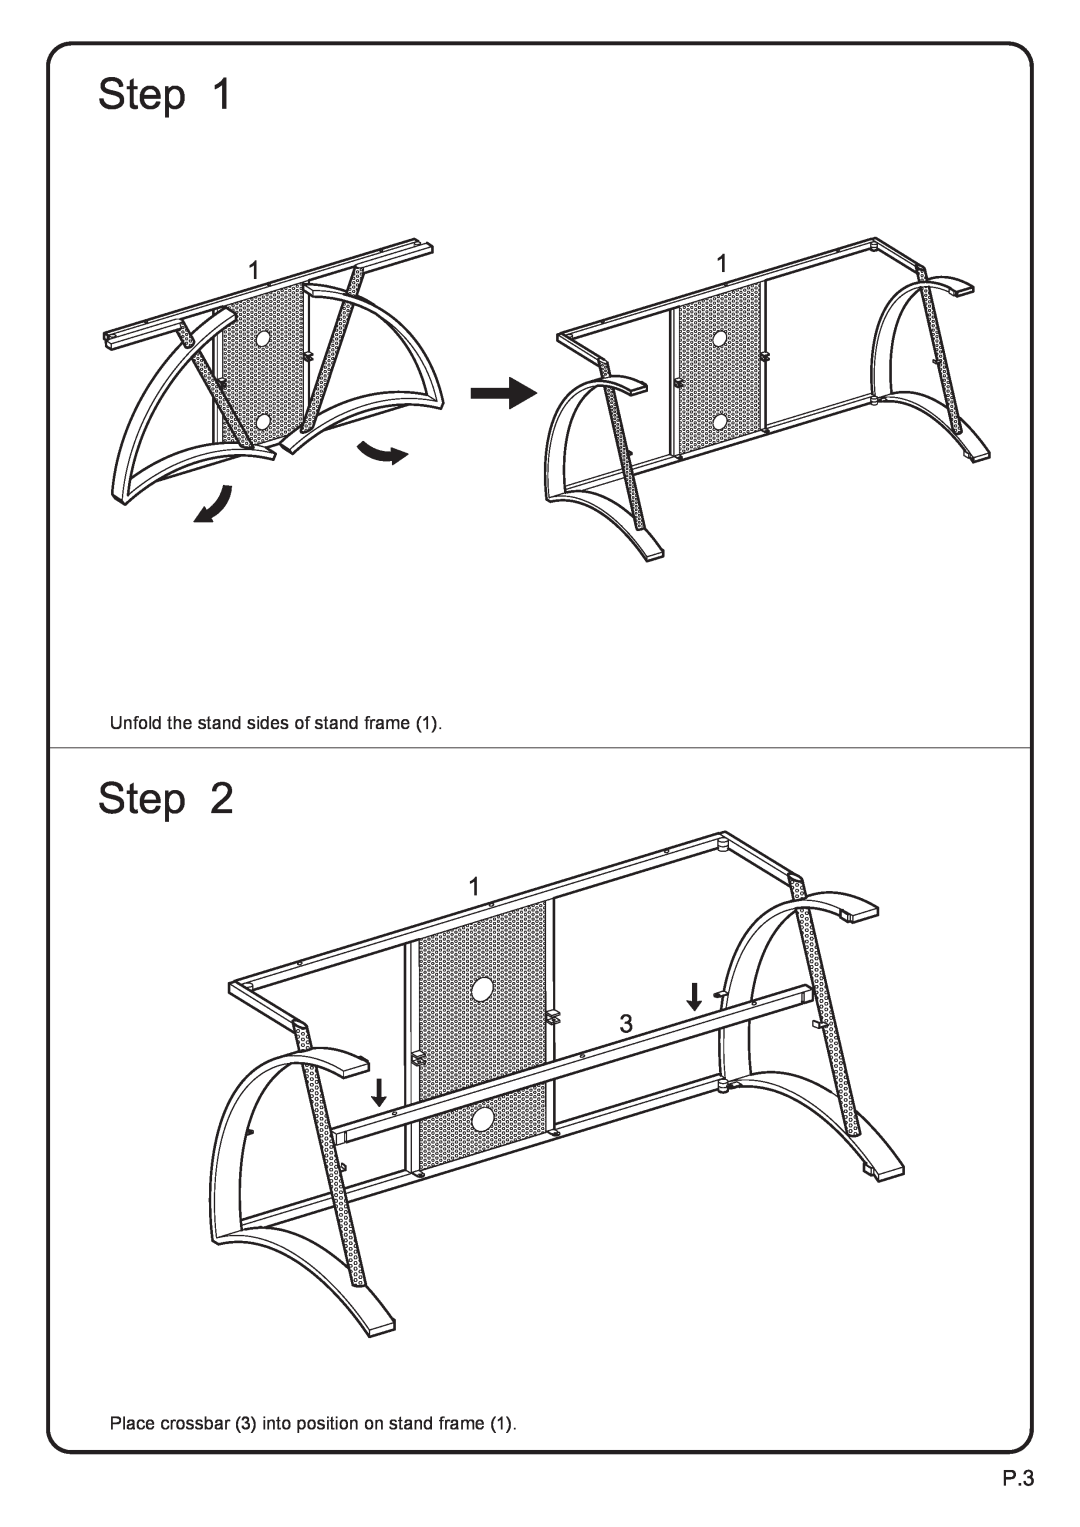 Walker V42GBB manual Unfold the stand sides of stand frame, Place crossbar 3 into position on stand frame 